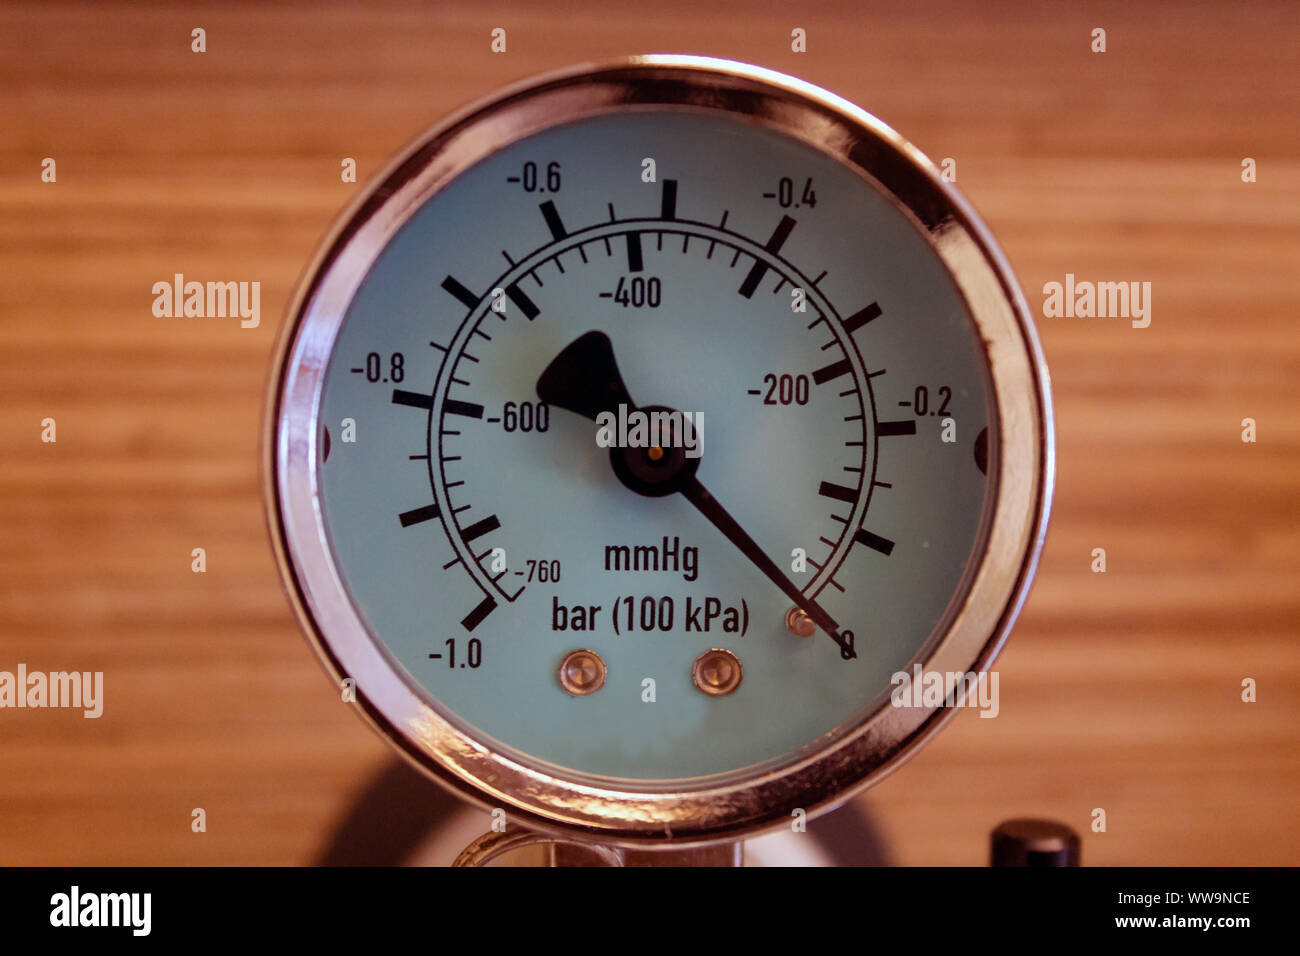 Close up front portrait of a pressure gauge indicating zero pressure. Elegant, metal, copper colored and with copy space. Stock Photo